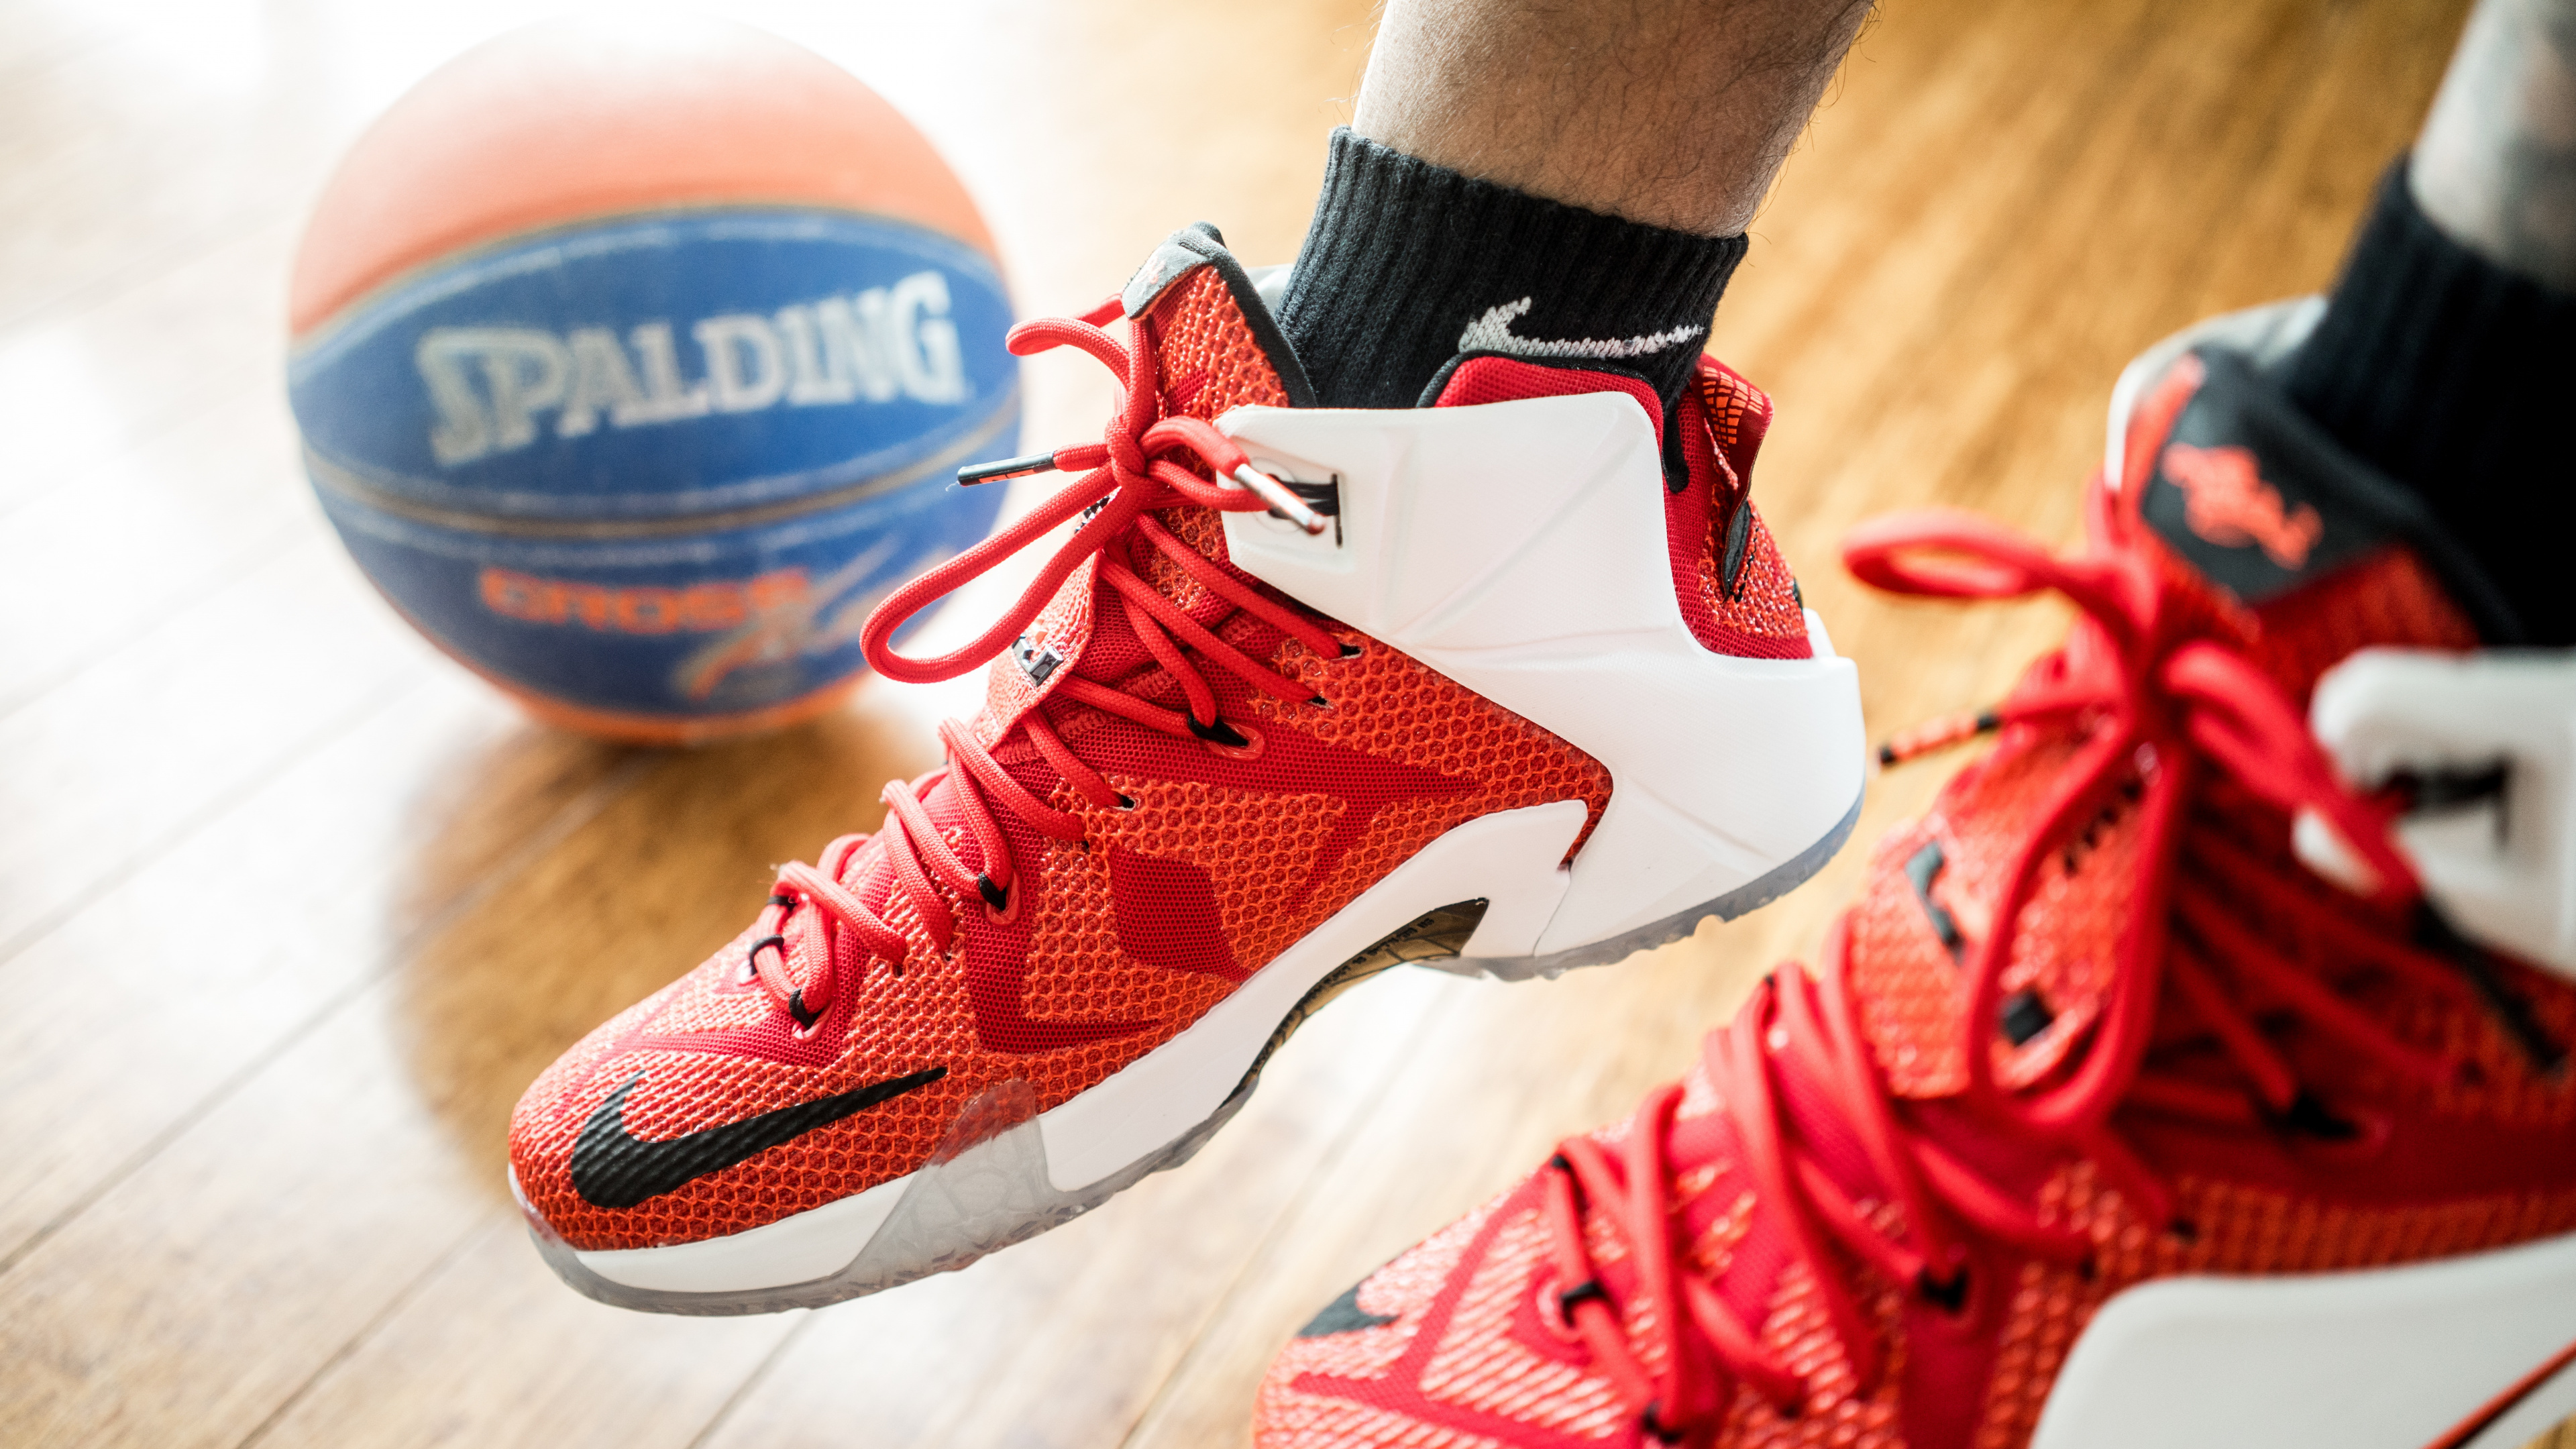 Person Wearing Red Nike Basketball Shoes. Wallpaper in 3840x2160 Resolution